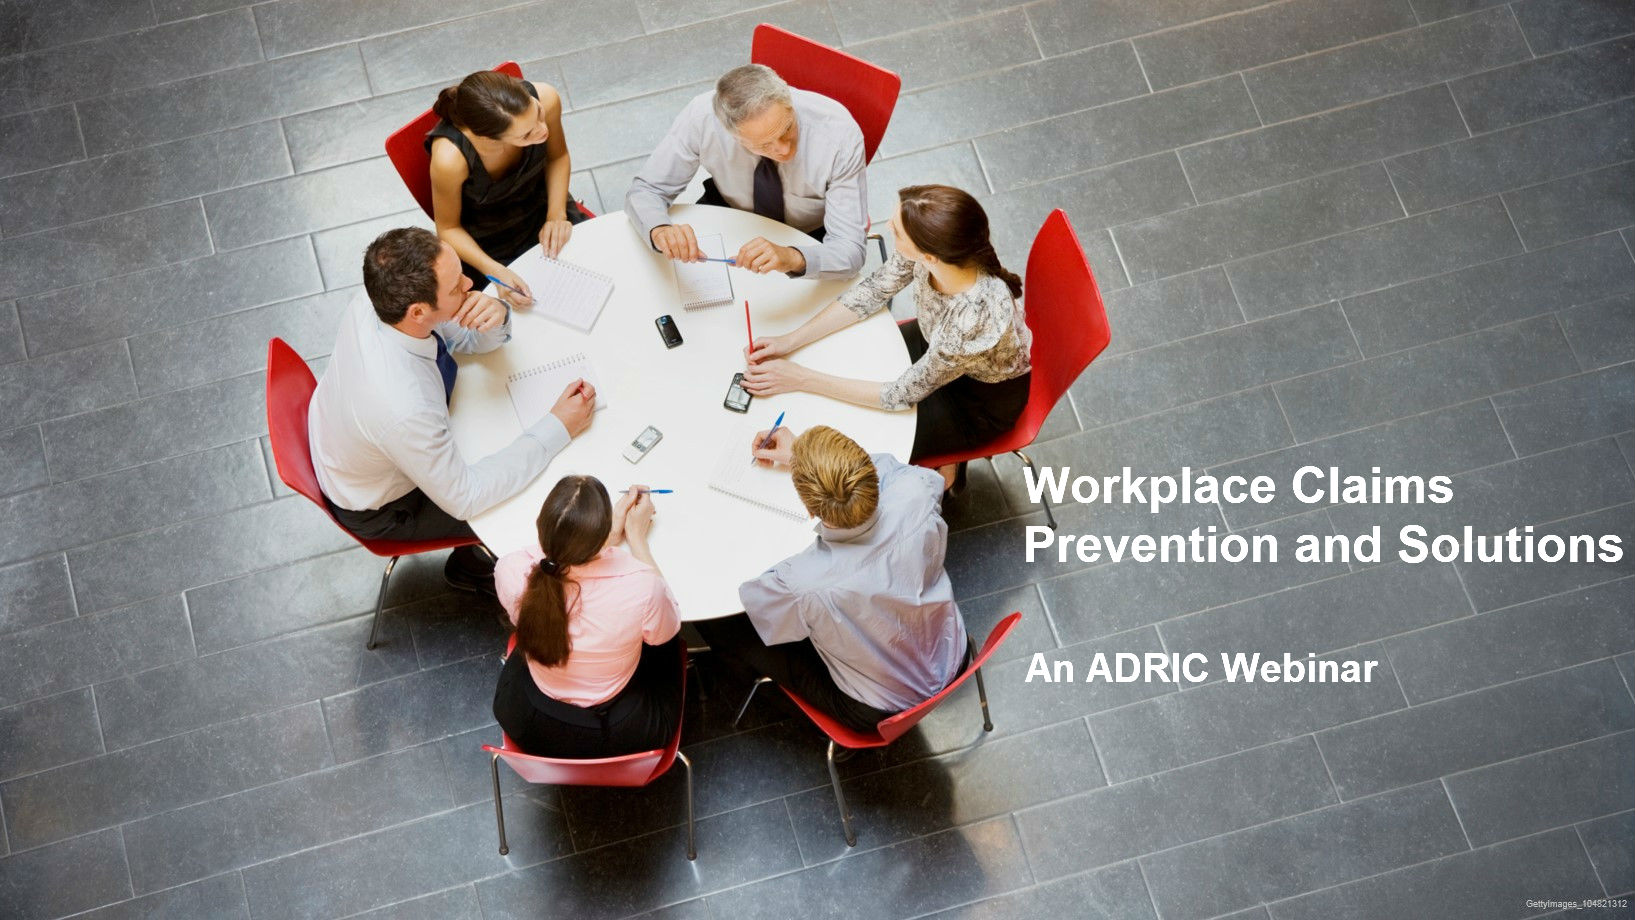 ADRIC Webinar - Workplace Claims Prevention and Solutions